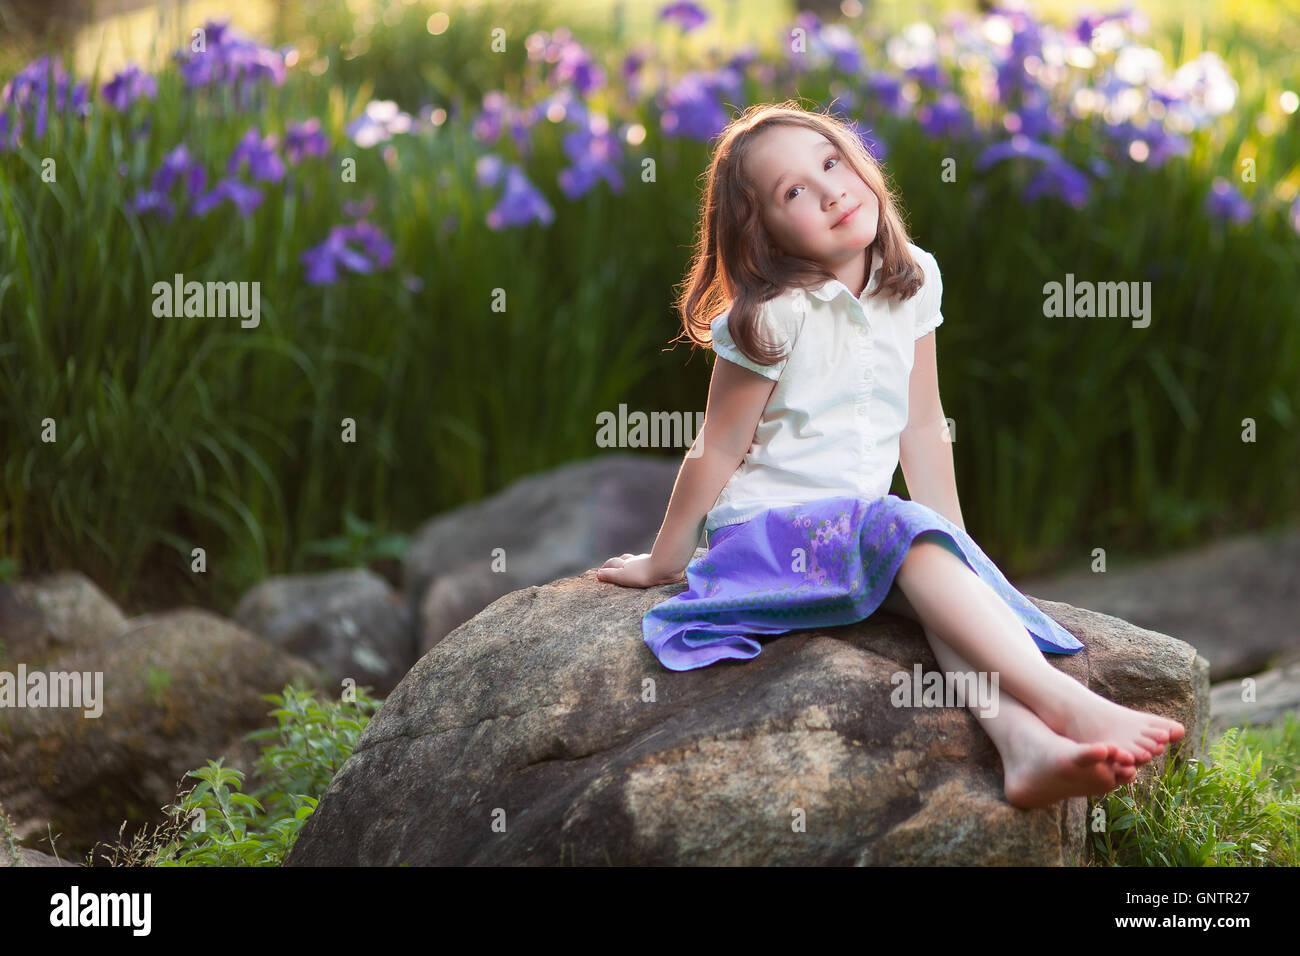 A beautiful young girl sits on a rock in a garden, deep in wistful thought. Stock Photo